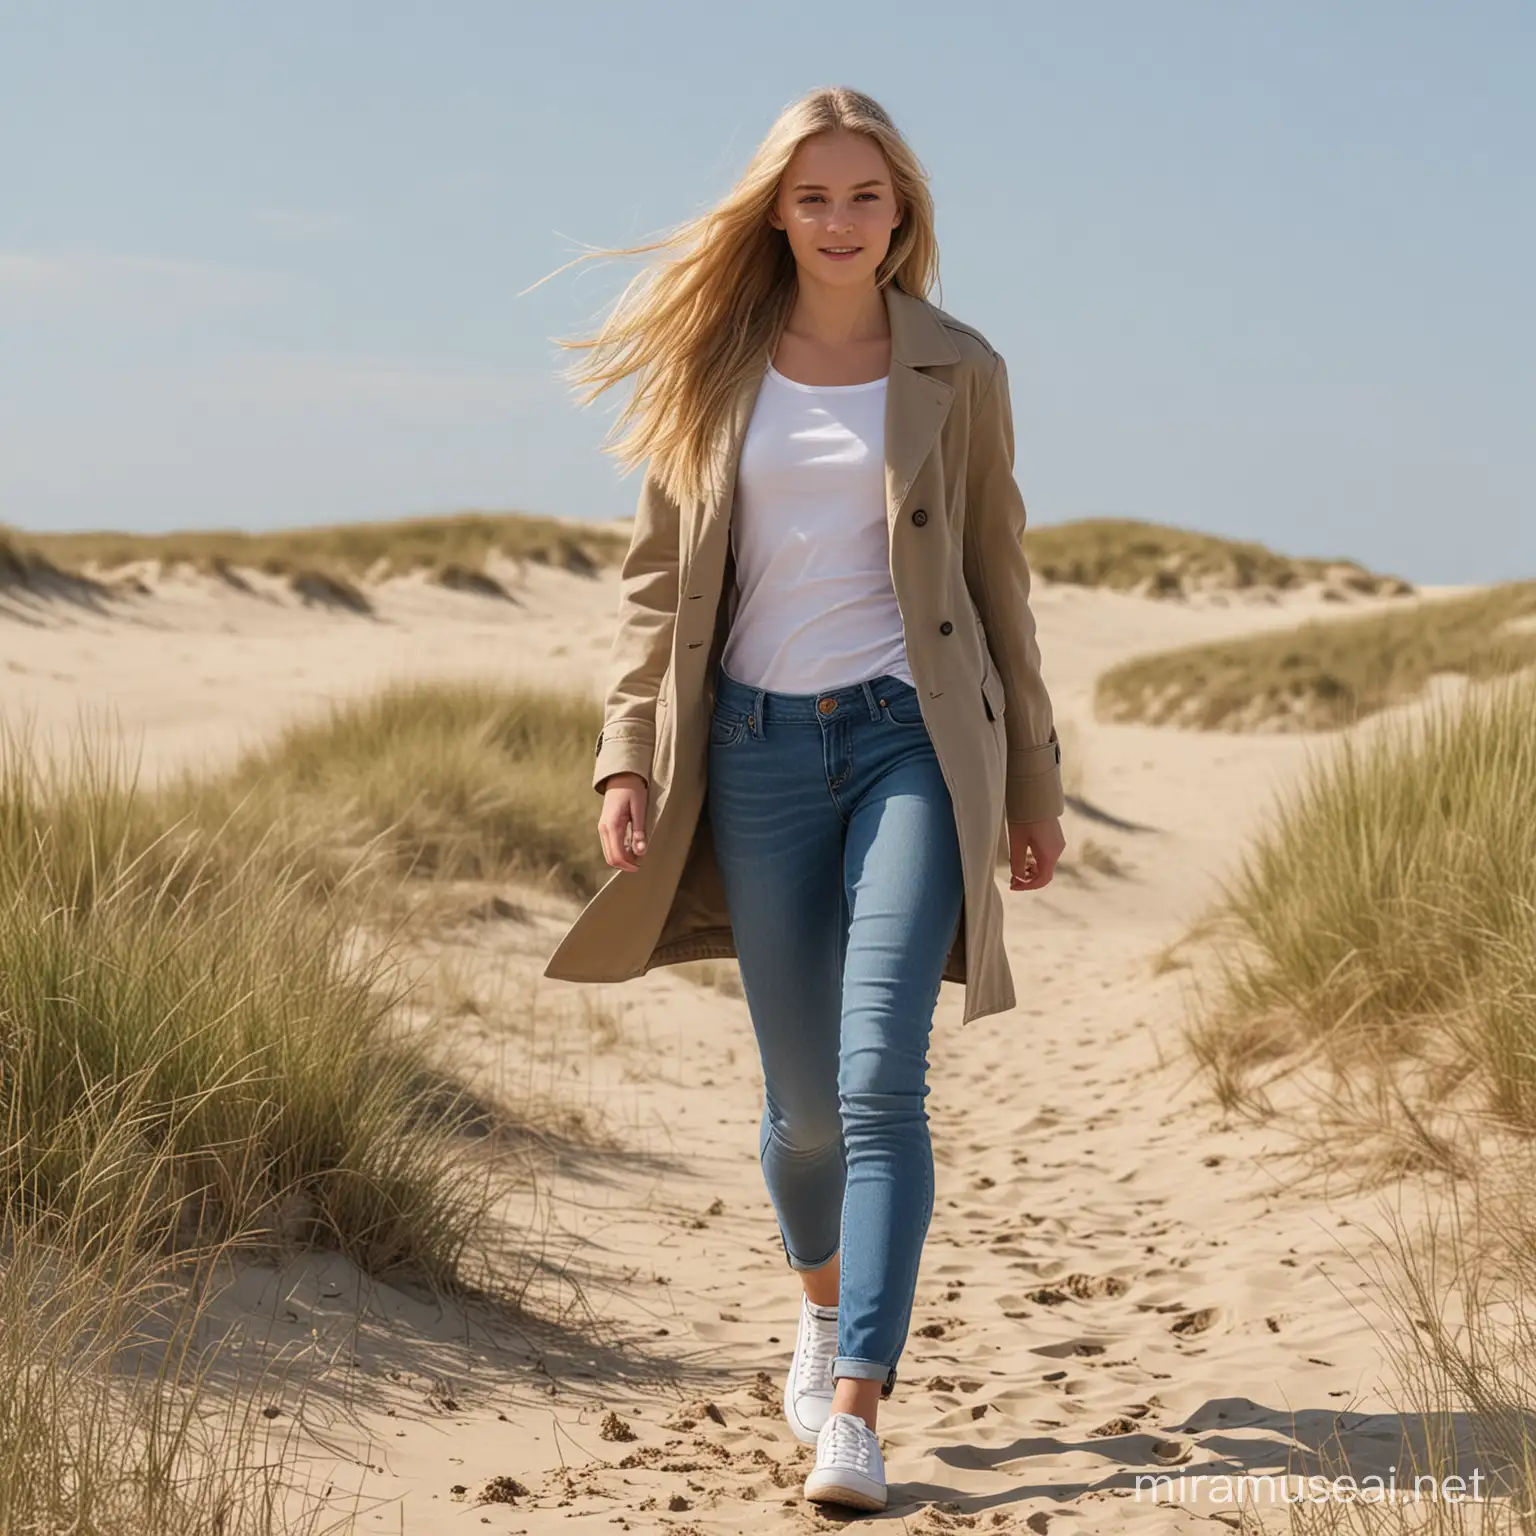 a gorgeous slender 16 year old european girl, long blonde hair, blue jeans, short coat walking through  a sea and dune landscape, sunny weather